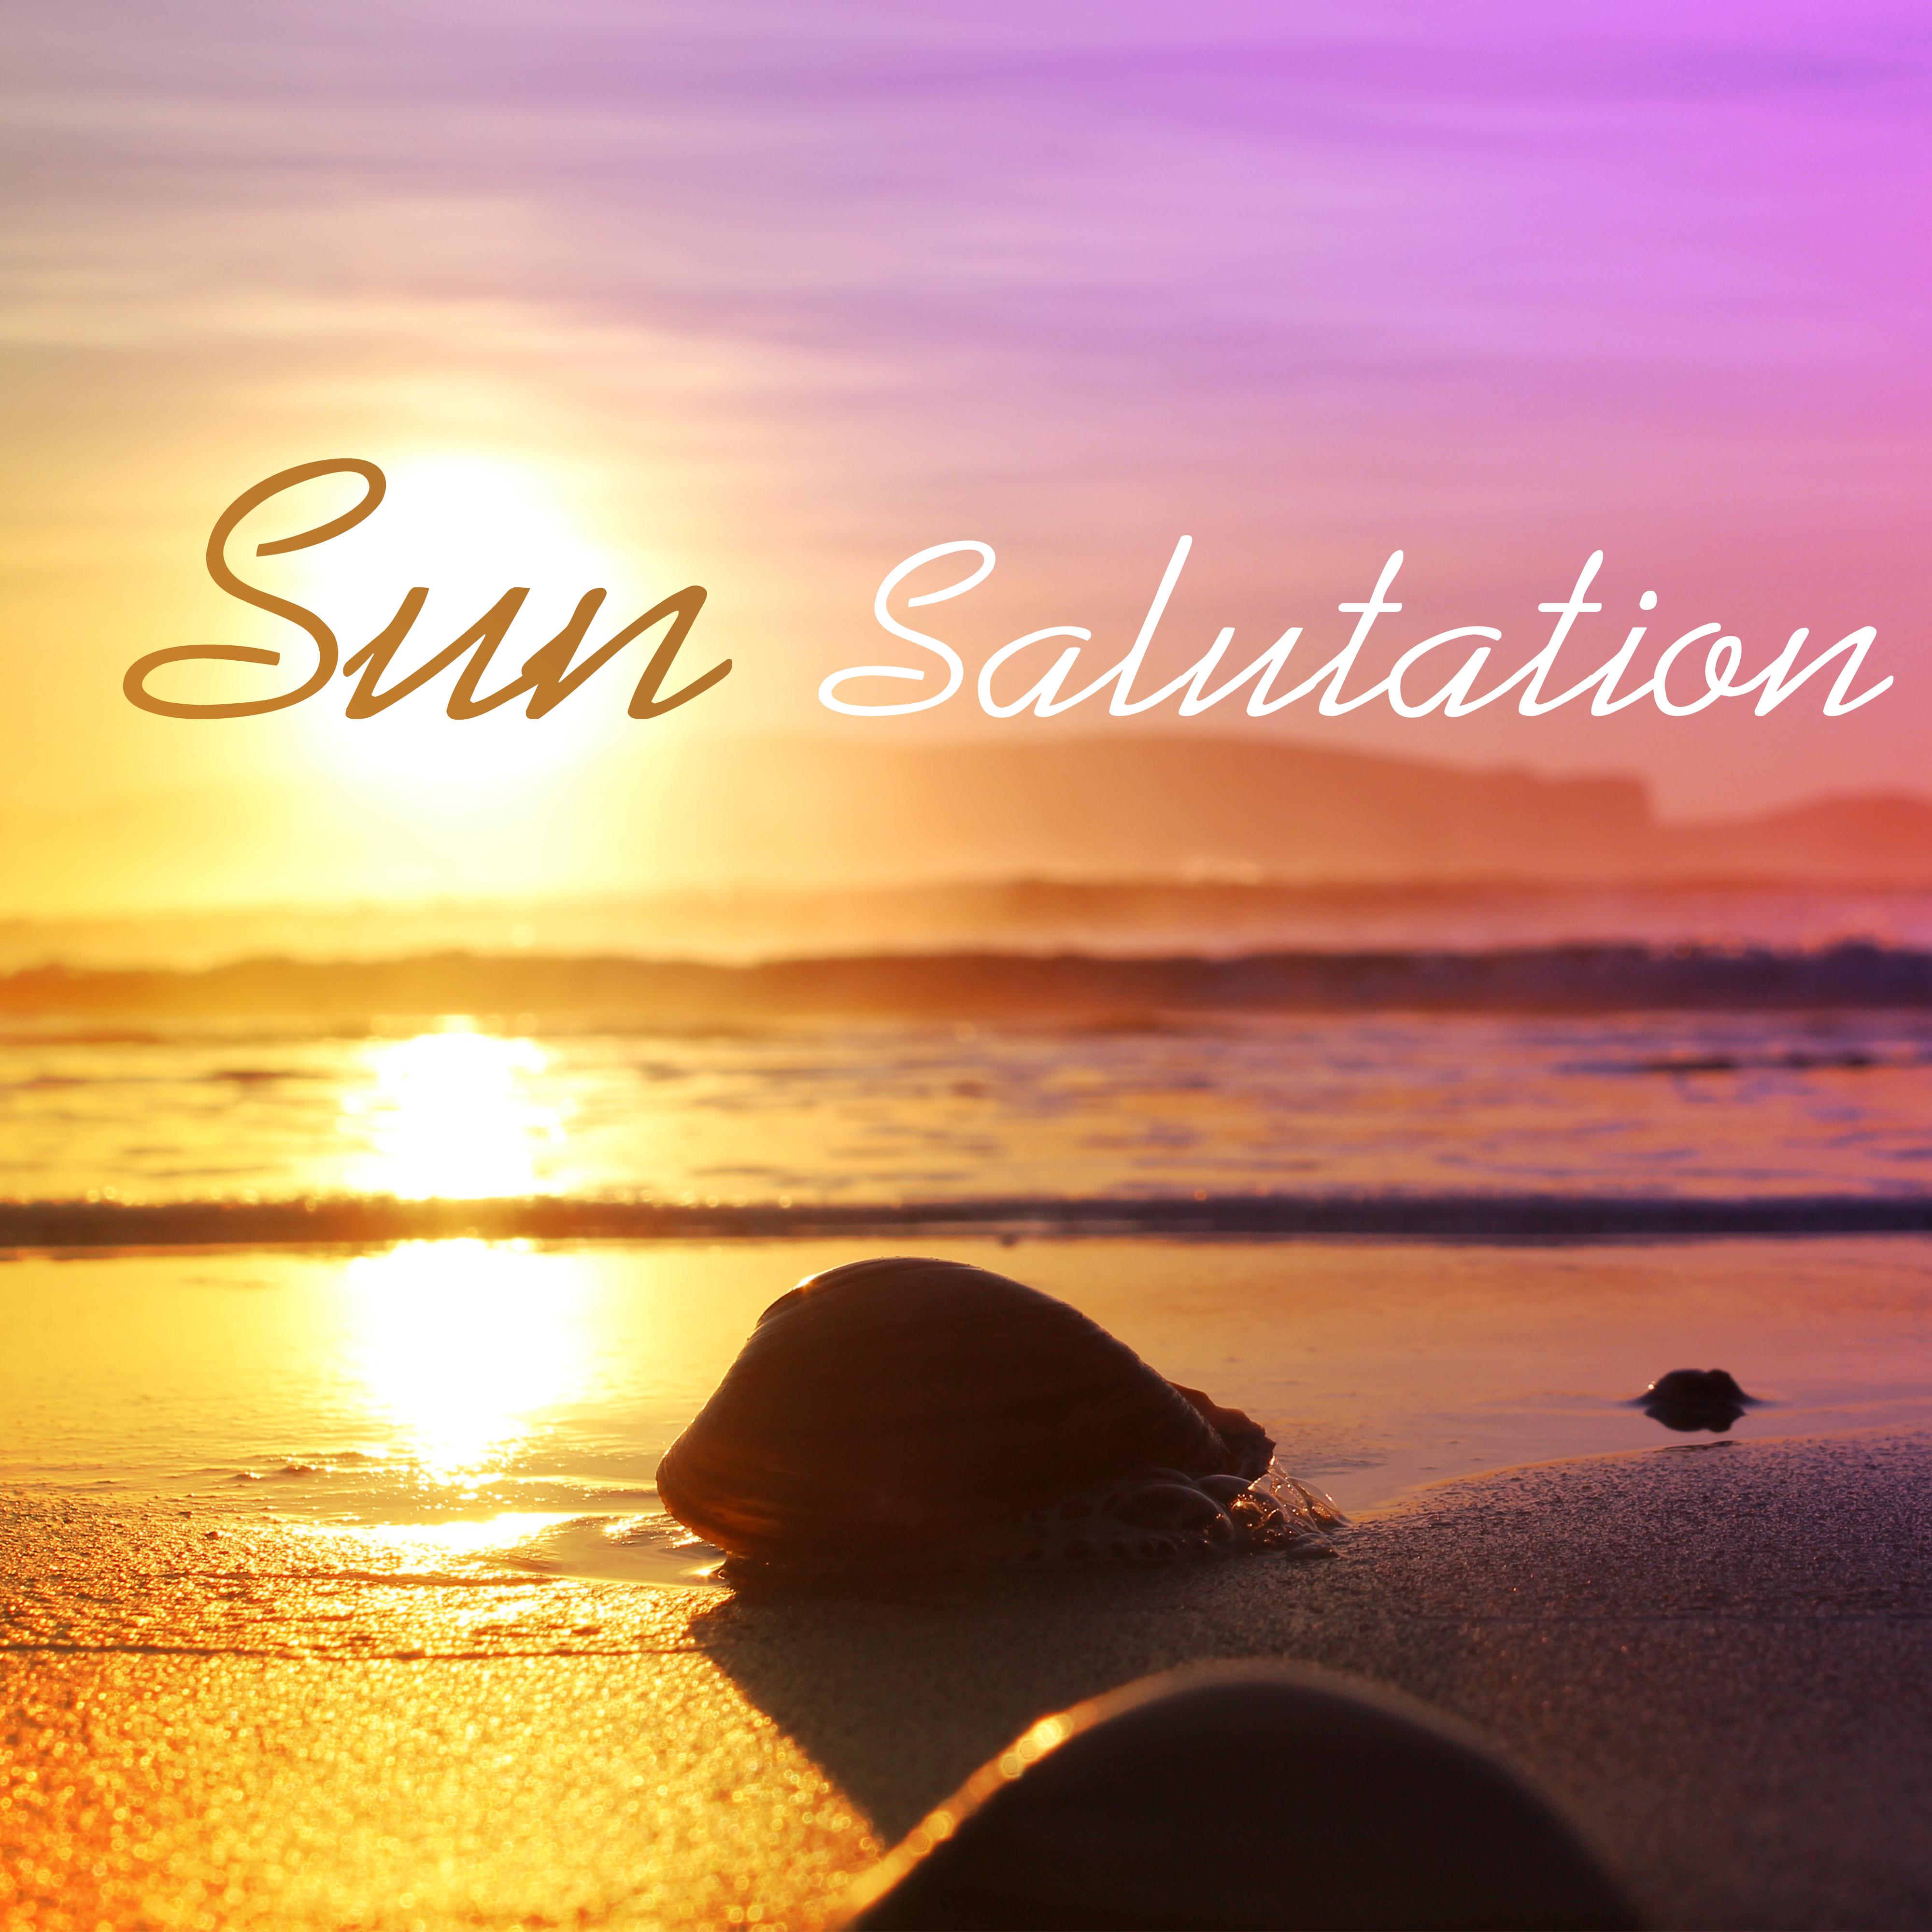 Sun Salutation  Ibiza Chill Out, Sun  Fun, Relax Under The Palms, Tropical Vibes, Chill Out 2017